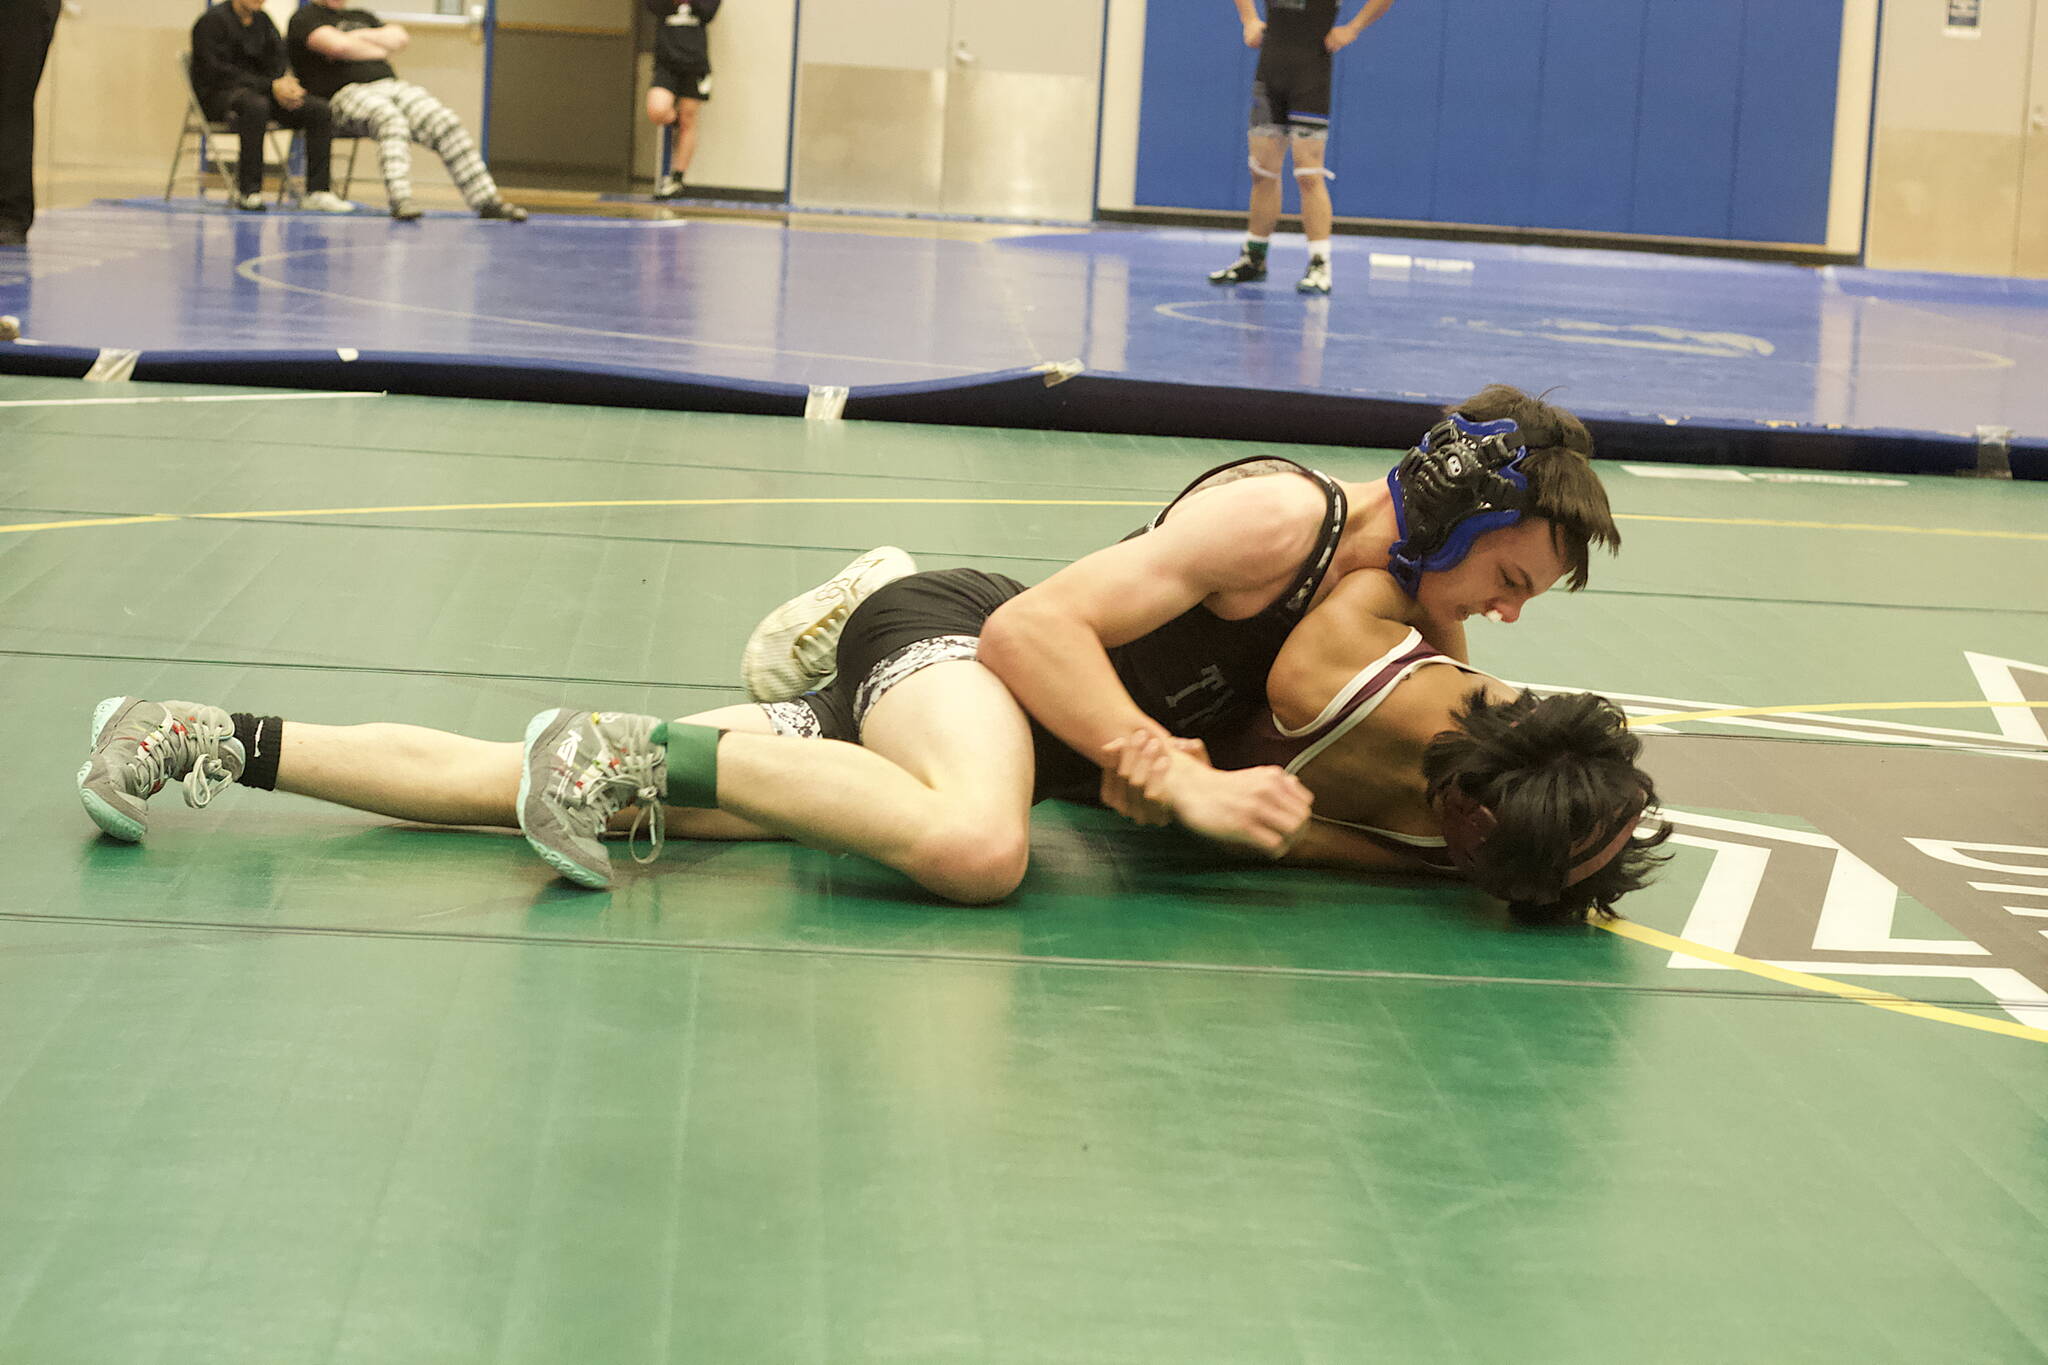 Gavin Holt of Thunder Mountain High School, top, tries to pin RJ Cadiente of Ketchikan High School in their third-place match in the Southeast Showdown at TMHS on Saturday. Cadiente won the match to claim third place in the 112-pound division. (Mark Sabbatini / Juneau Empire)